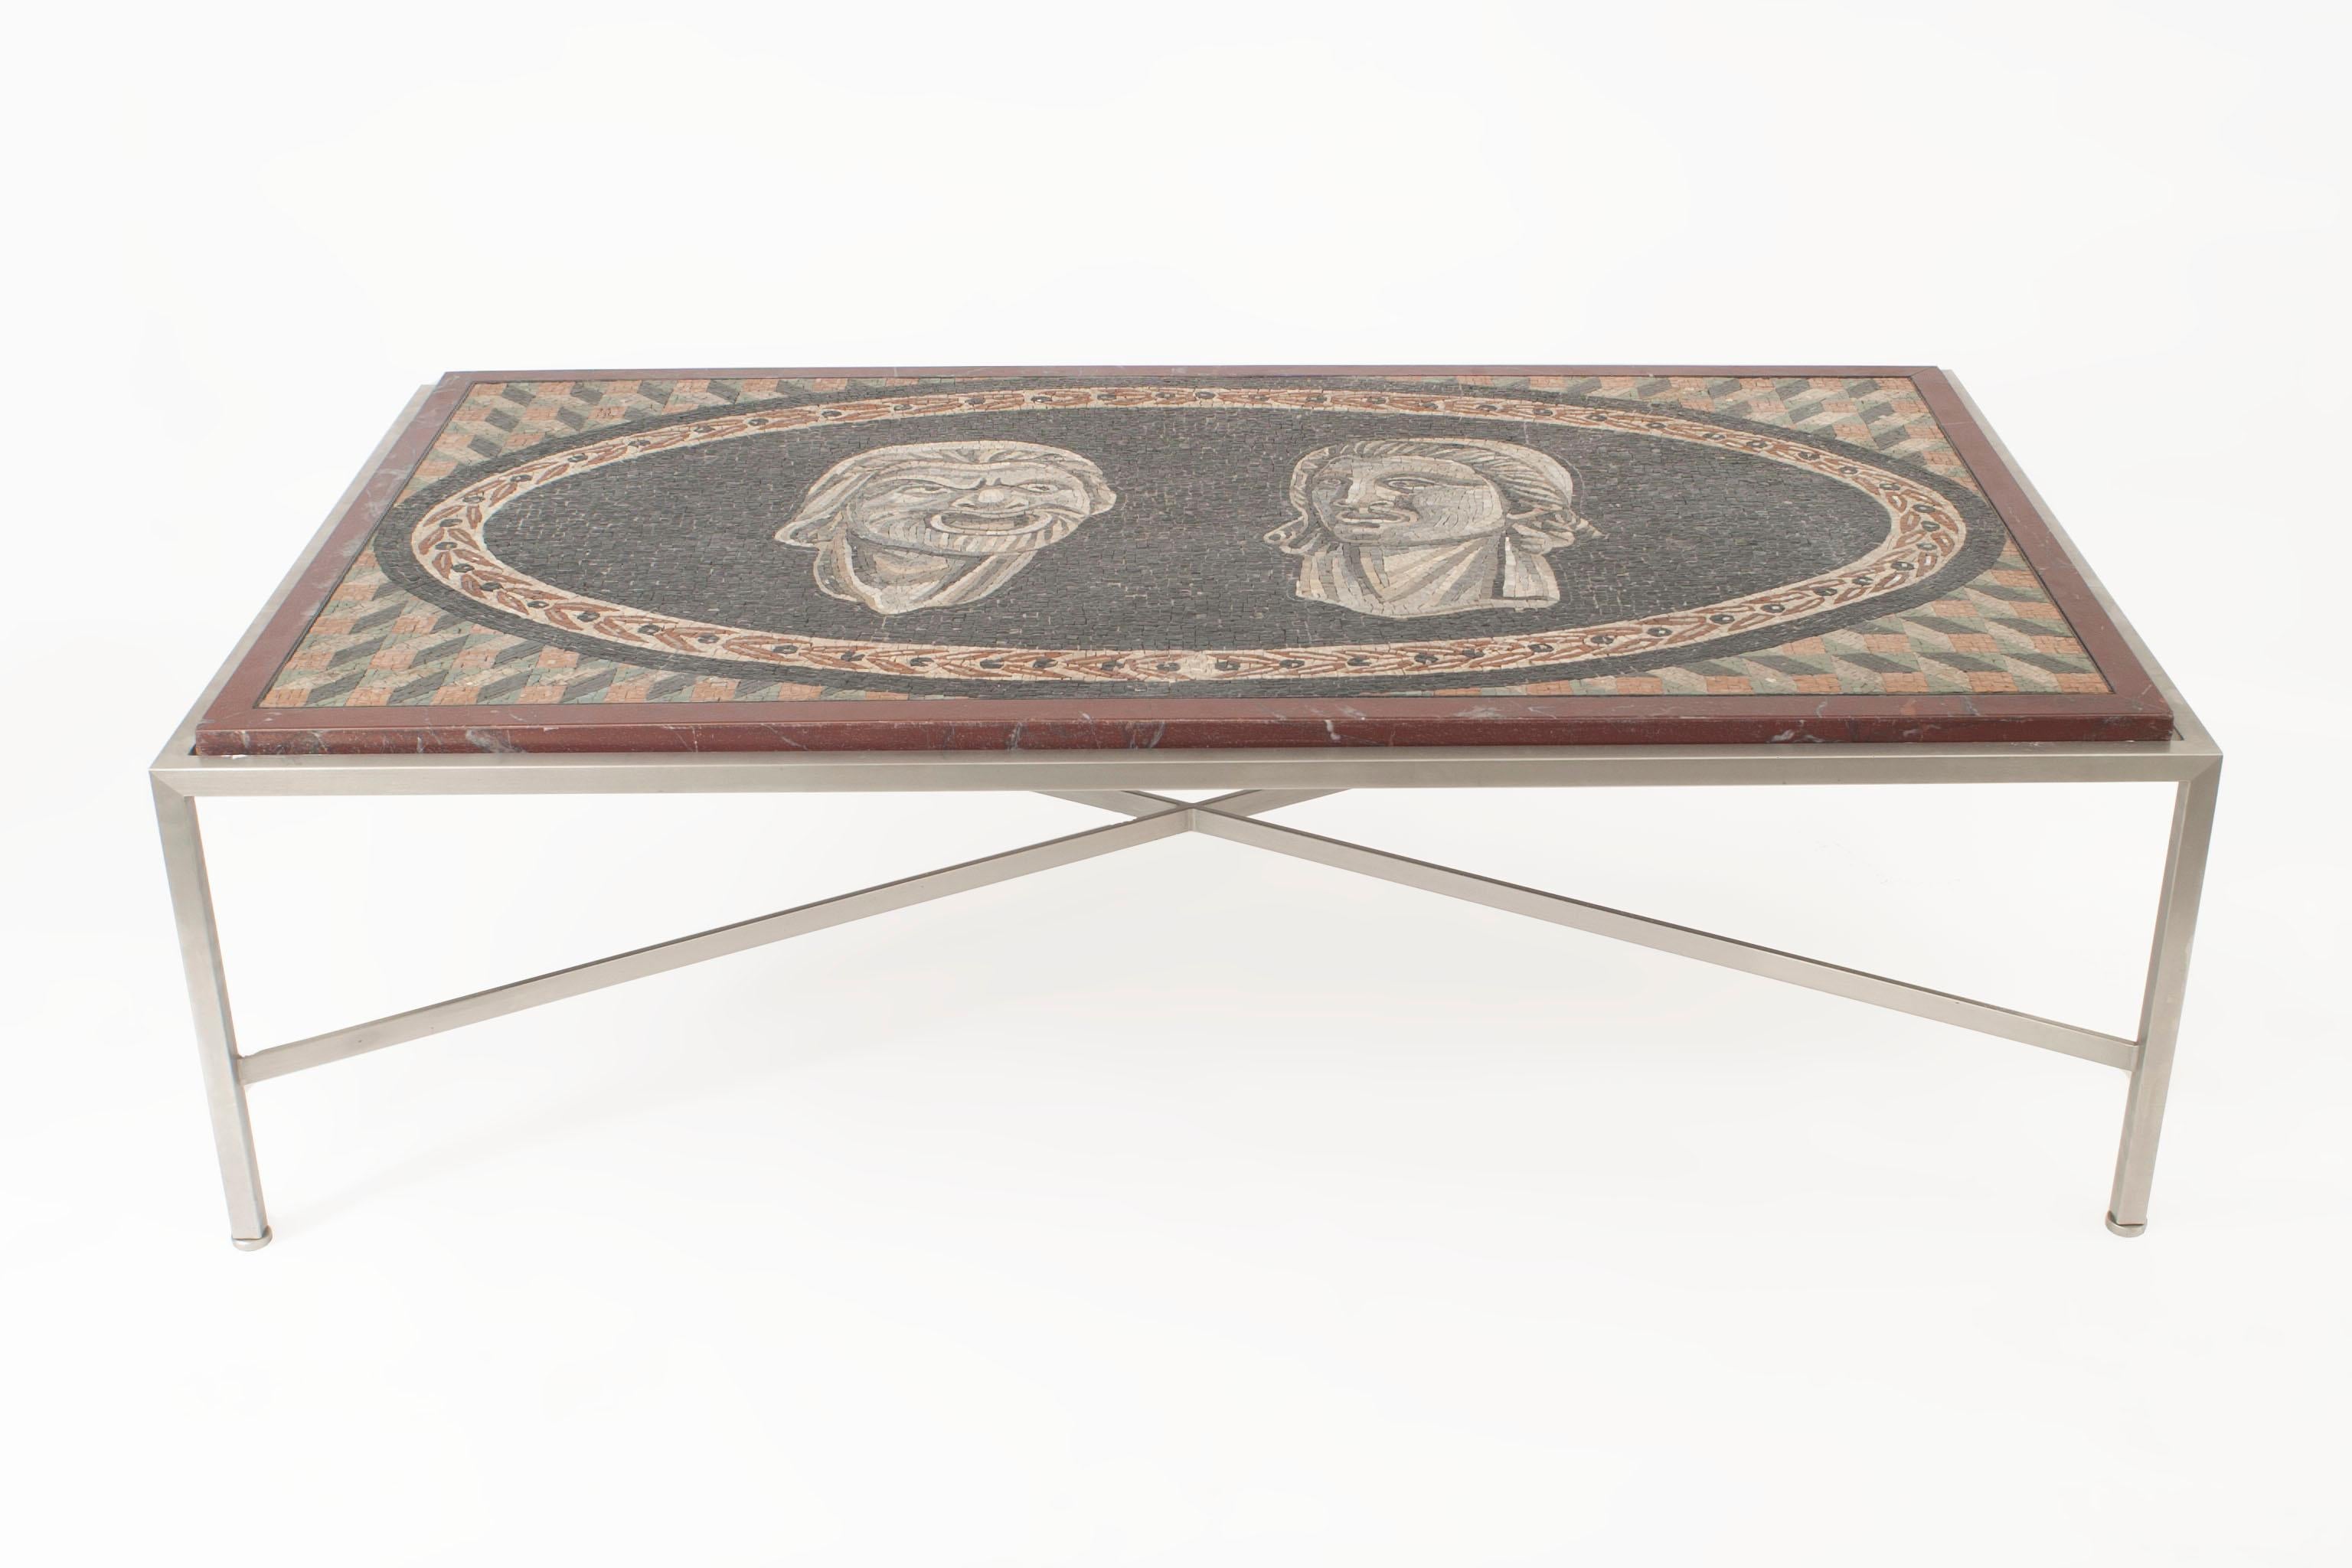 Italian Neo-Classic rectangular coffee table with mosaic marble top (19th Century) showing 2 Roman faces set in a steel base with a stretcher.